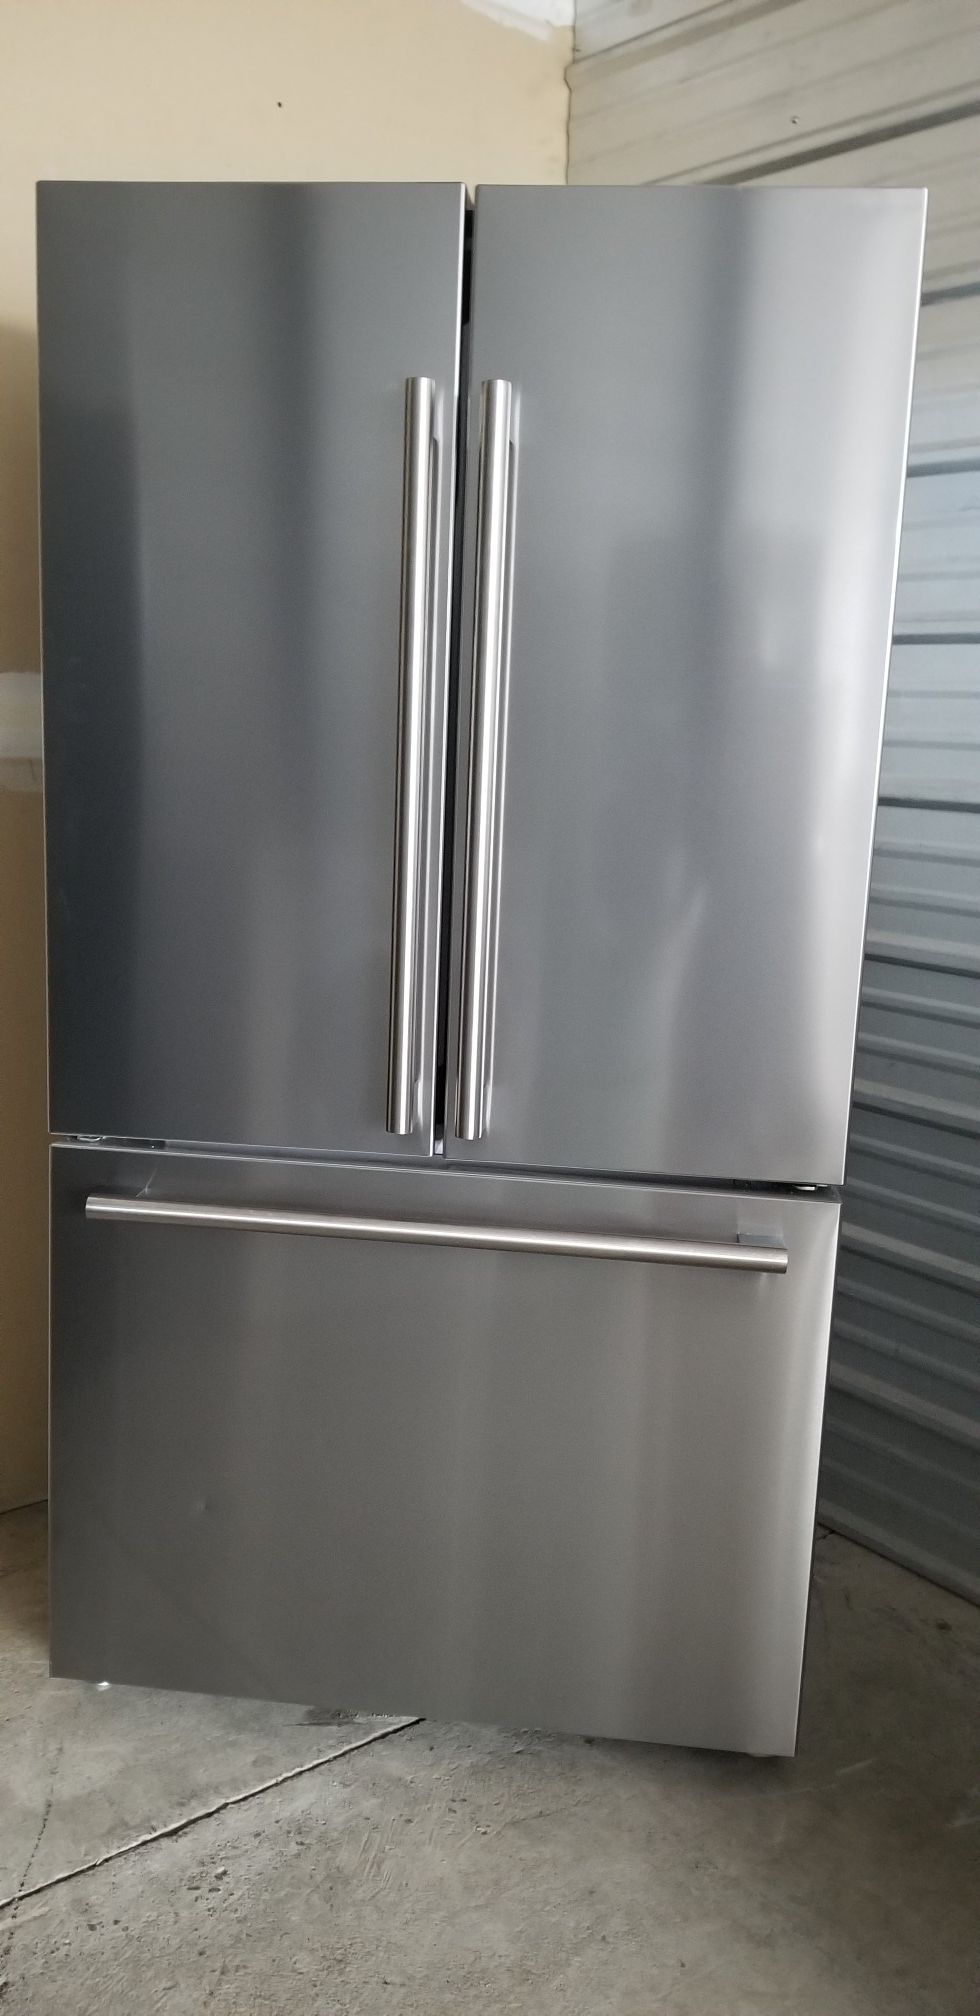 BLOMBERG cabinet depth refrigerator with water and ice maker dispenser inside